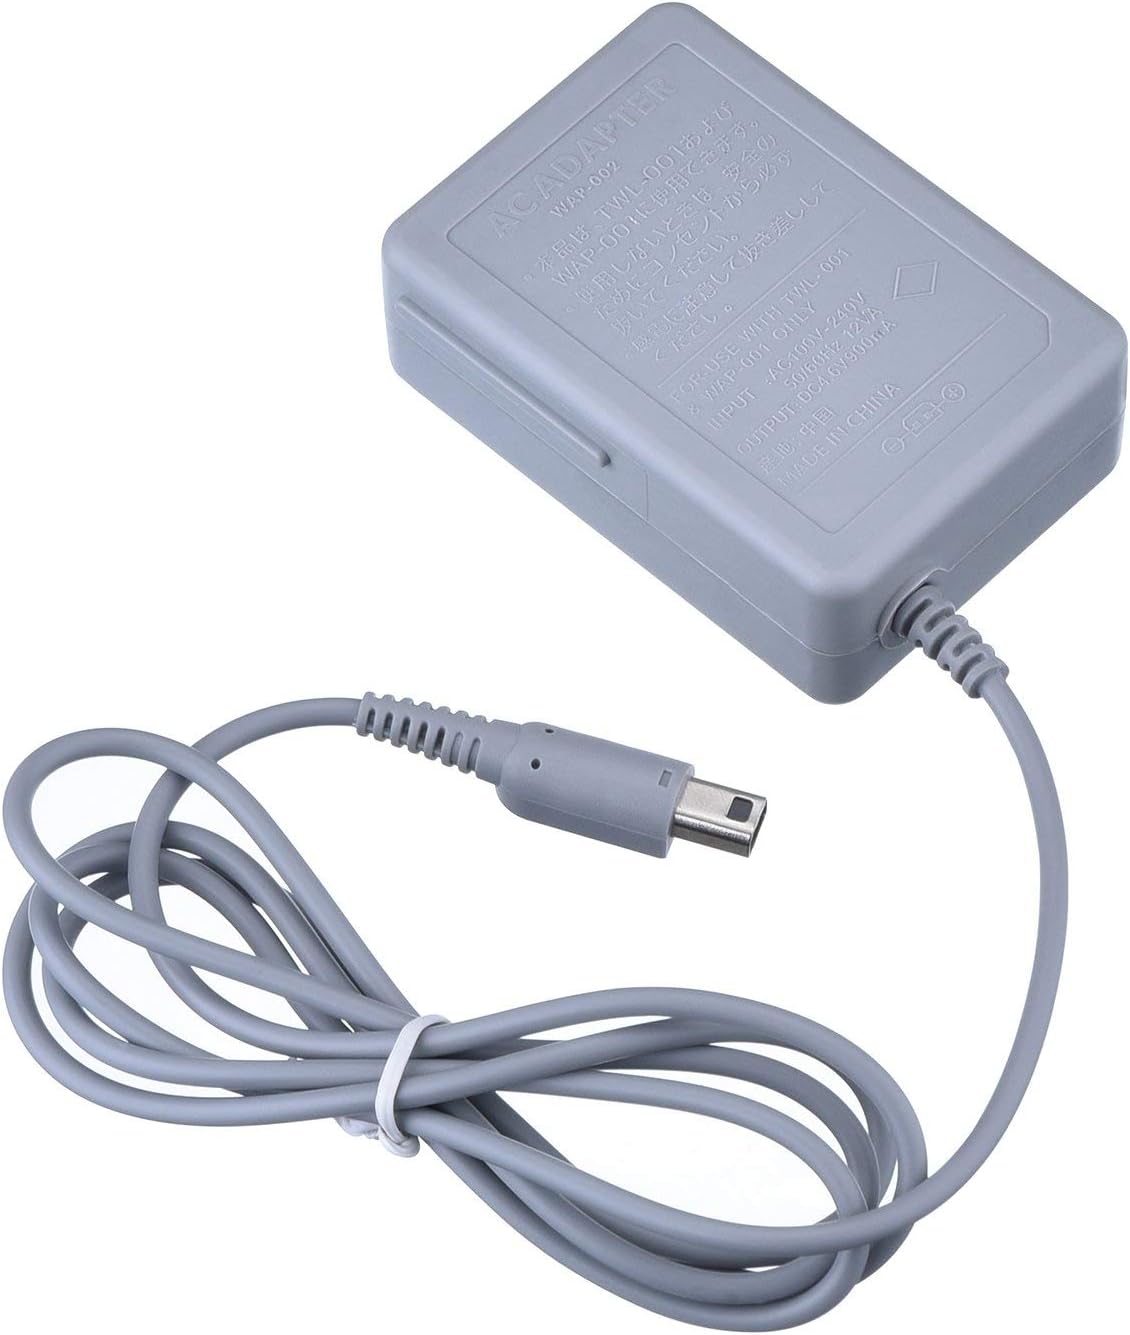 Adapter Battery Charger for DSi/NDSi / 2DS / 2DS XL/ 3DS / 3DS XL